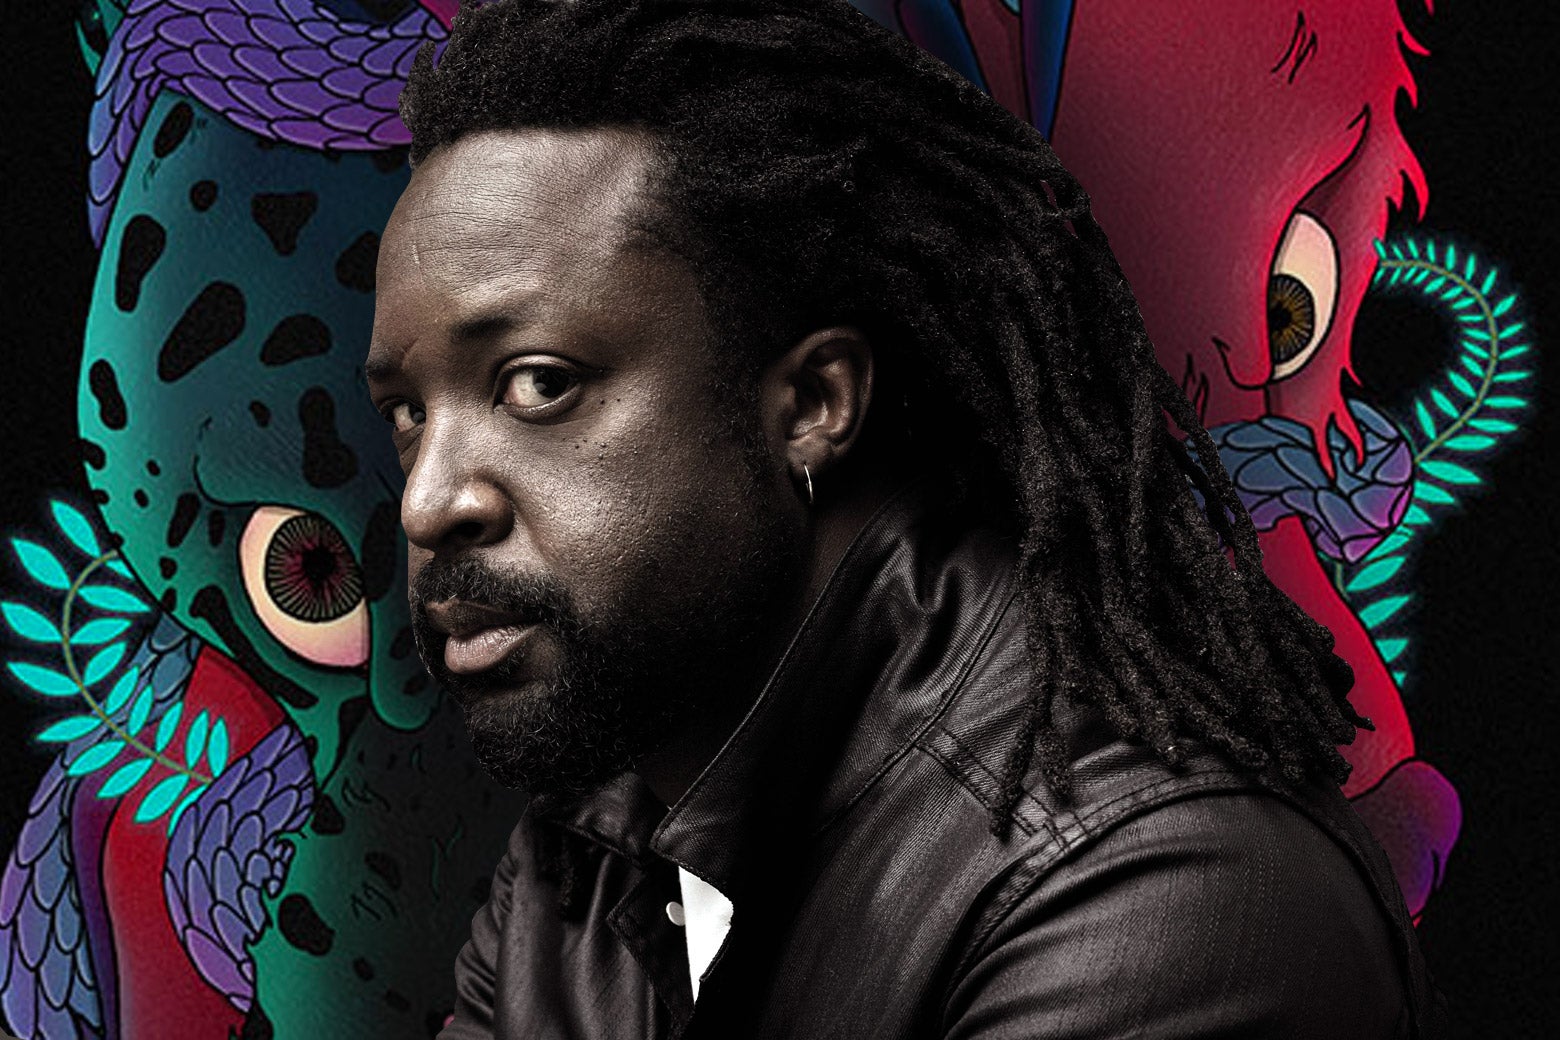 Marlon James against a backdrop reminiscent of his book cover.